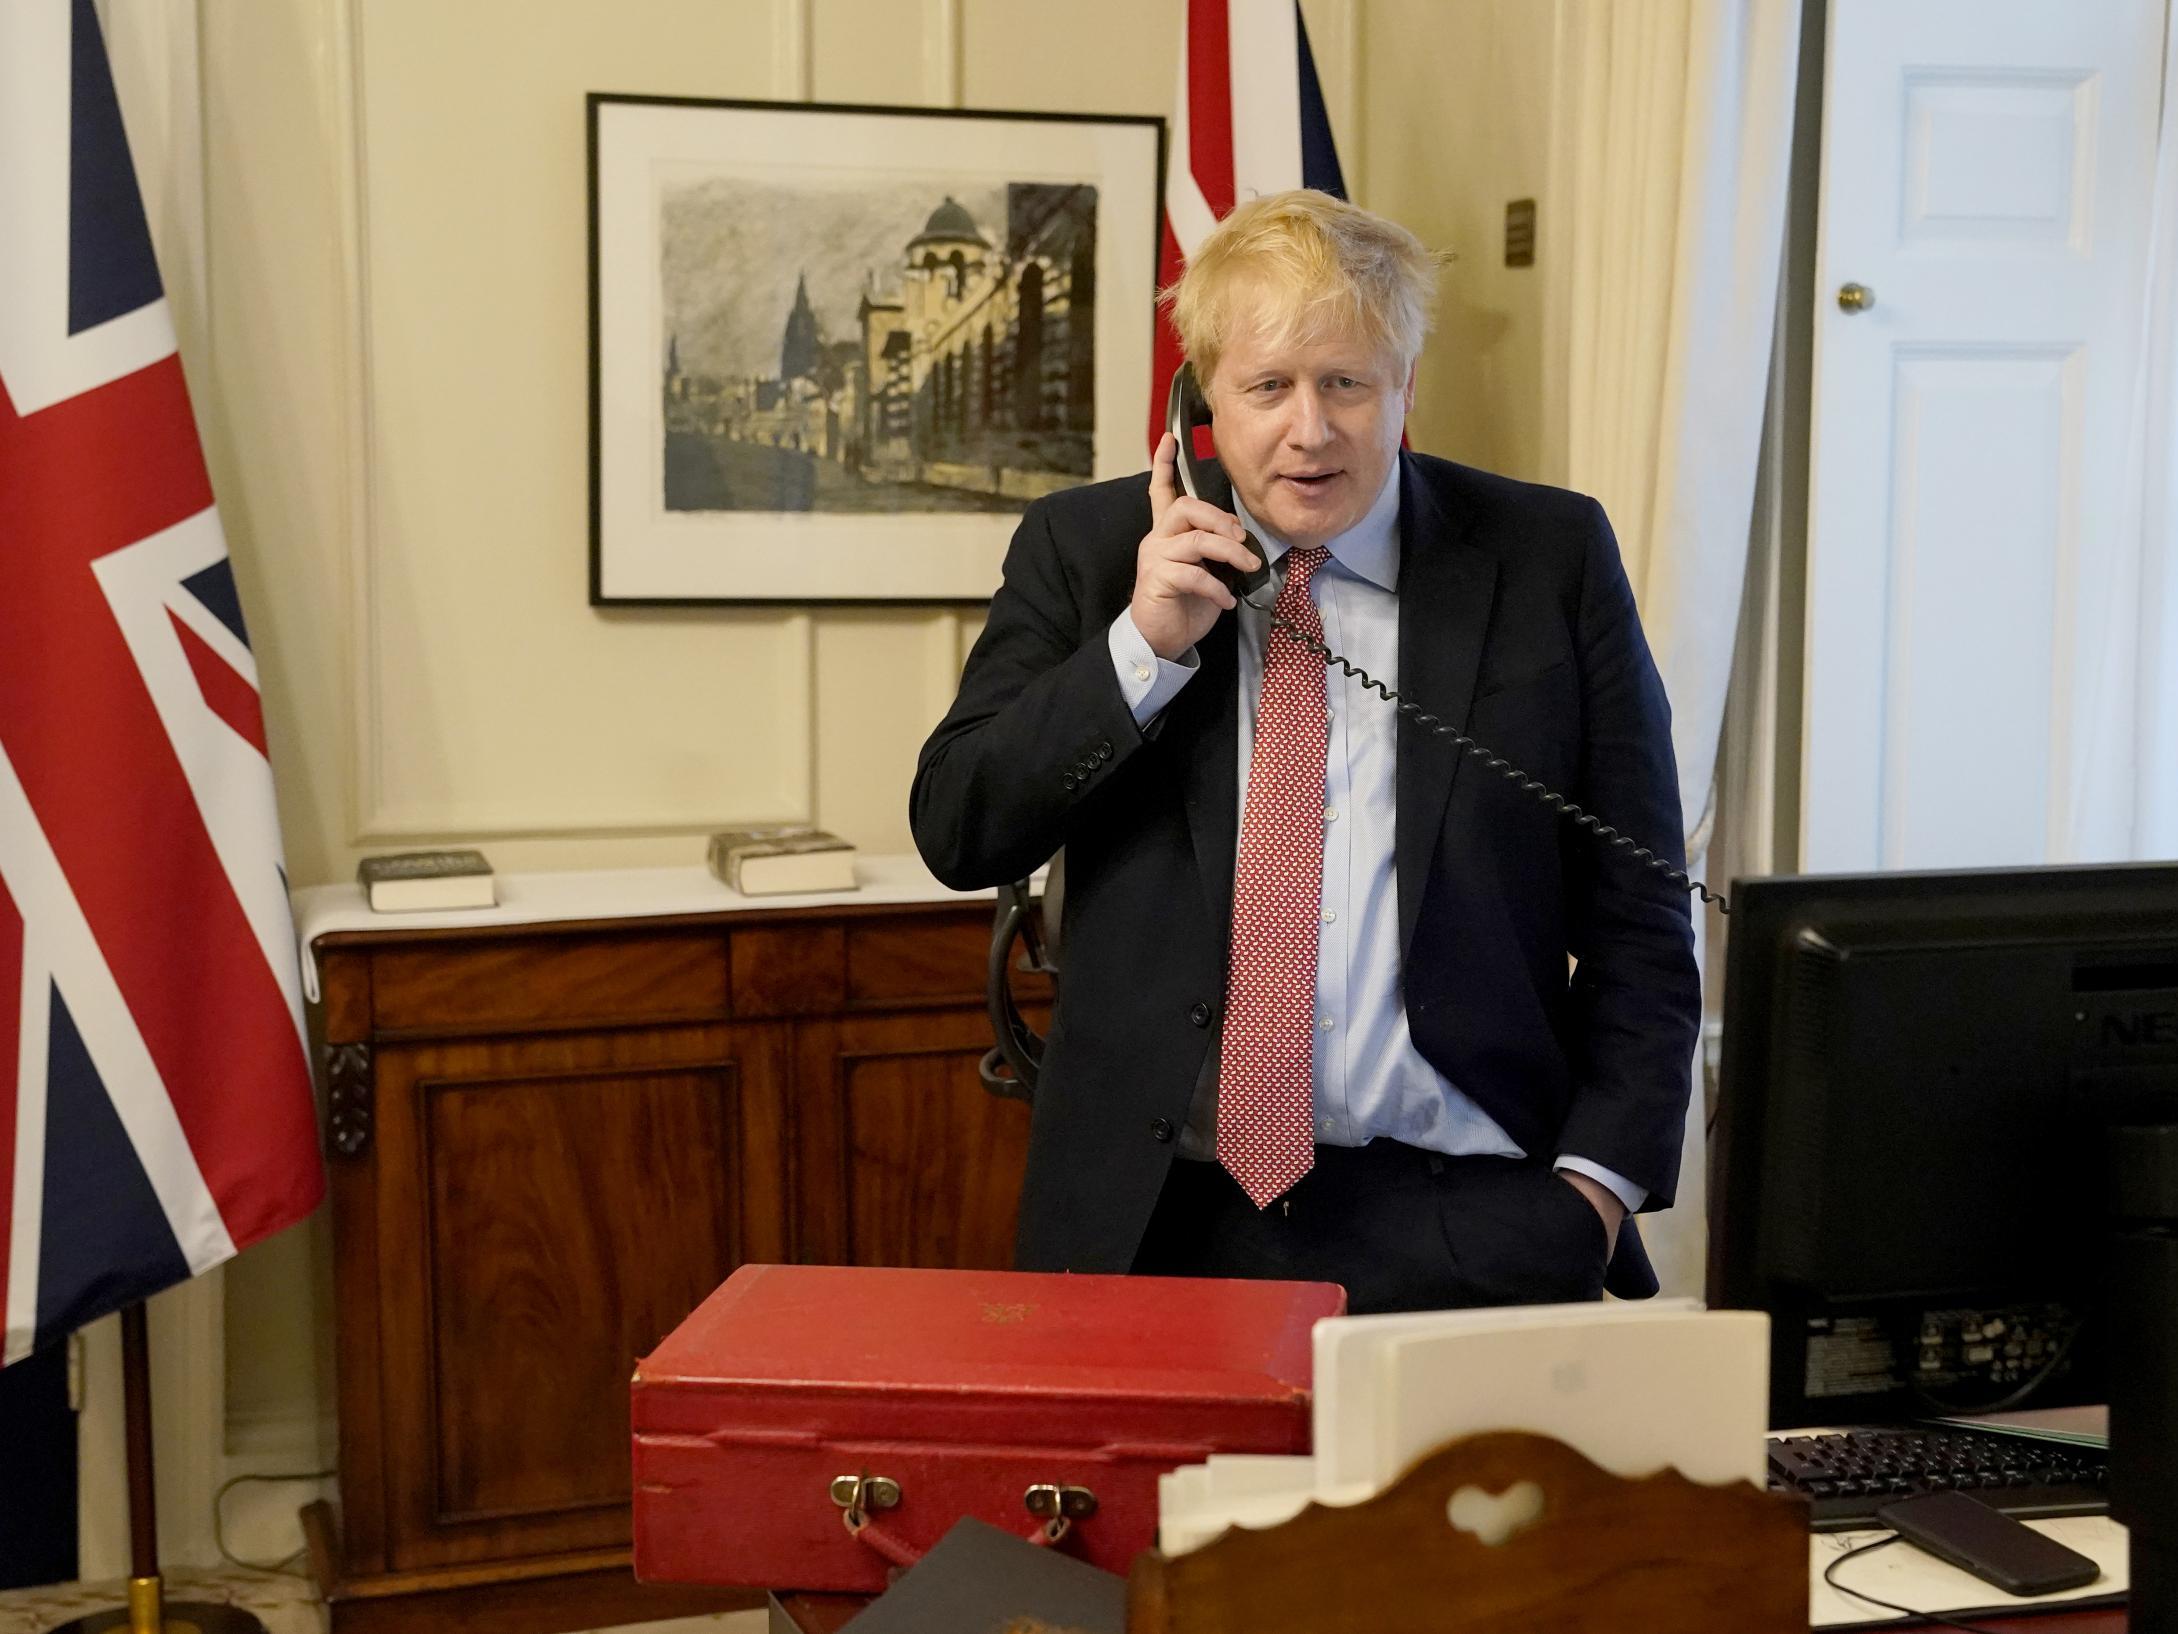 Boris Johnson is accused of missing five Cobra meetings in January and February